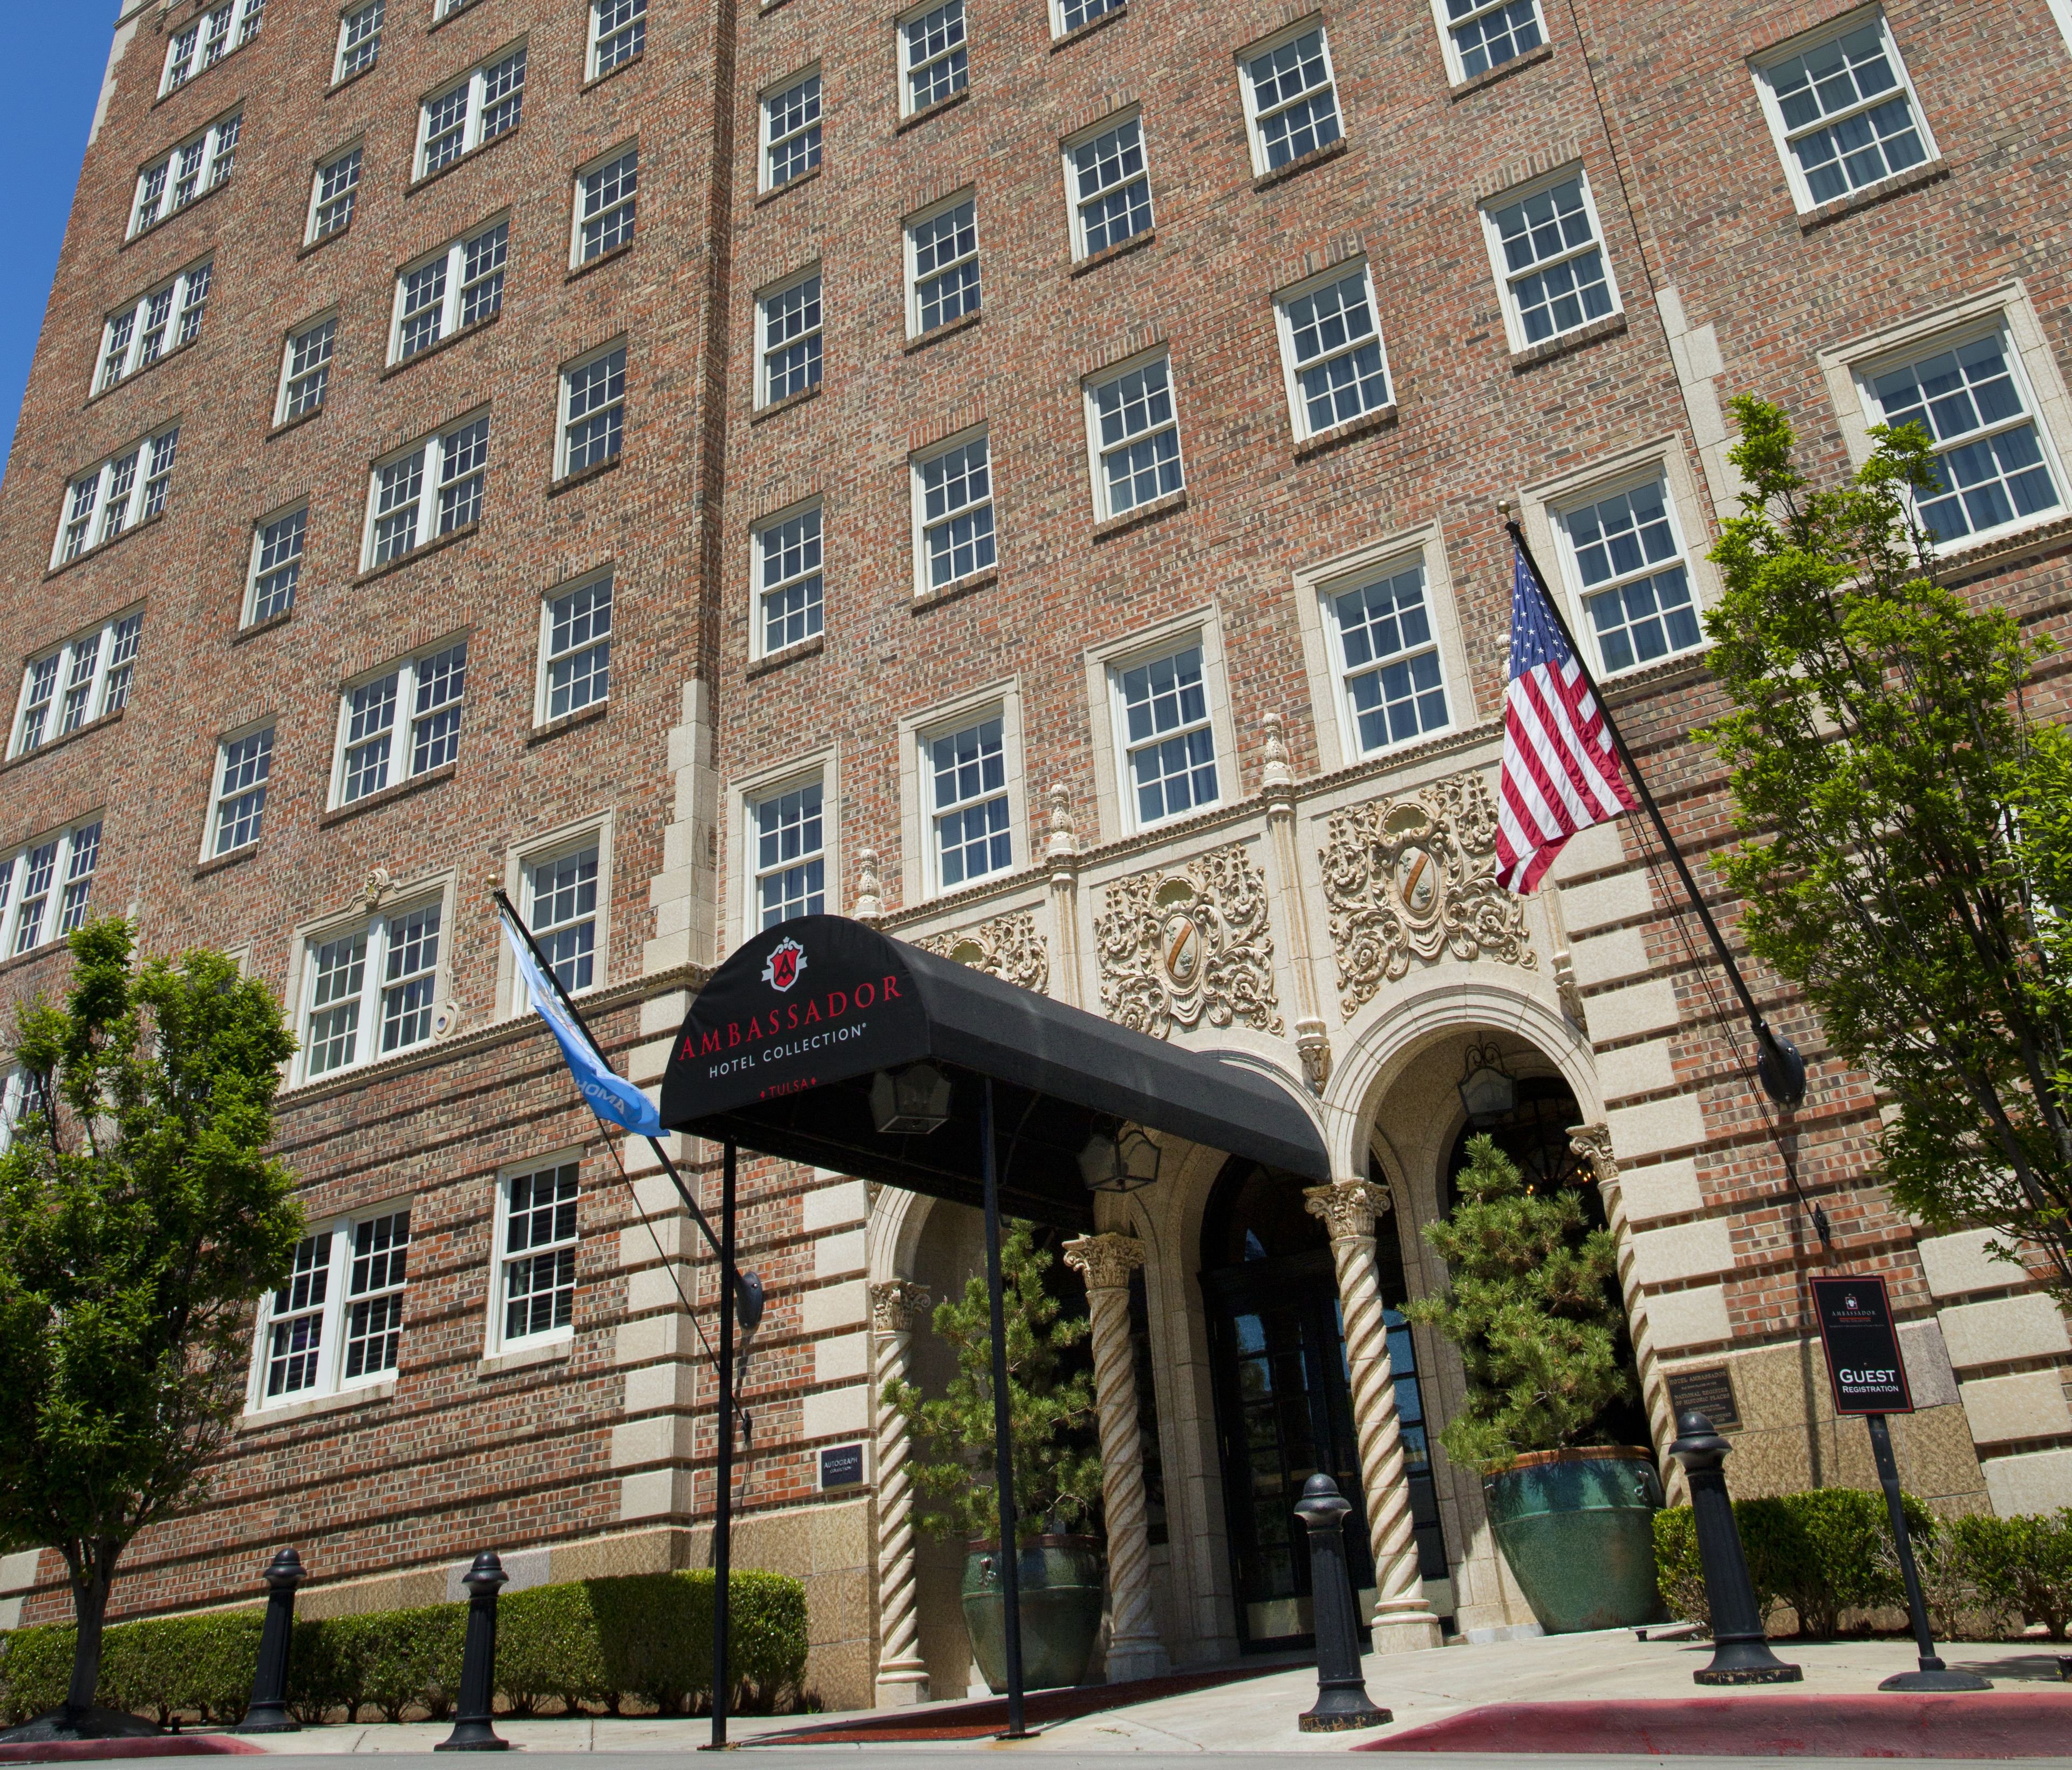 Ambassador Hotel Tulsa implements online streaming voice control 